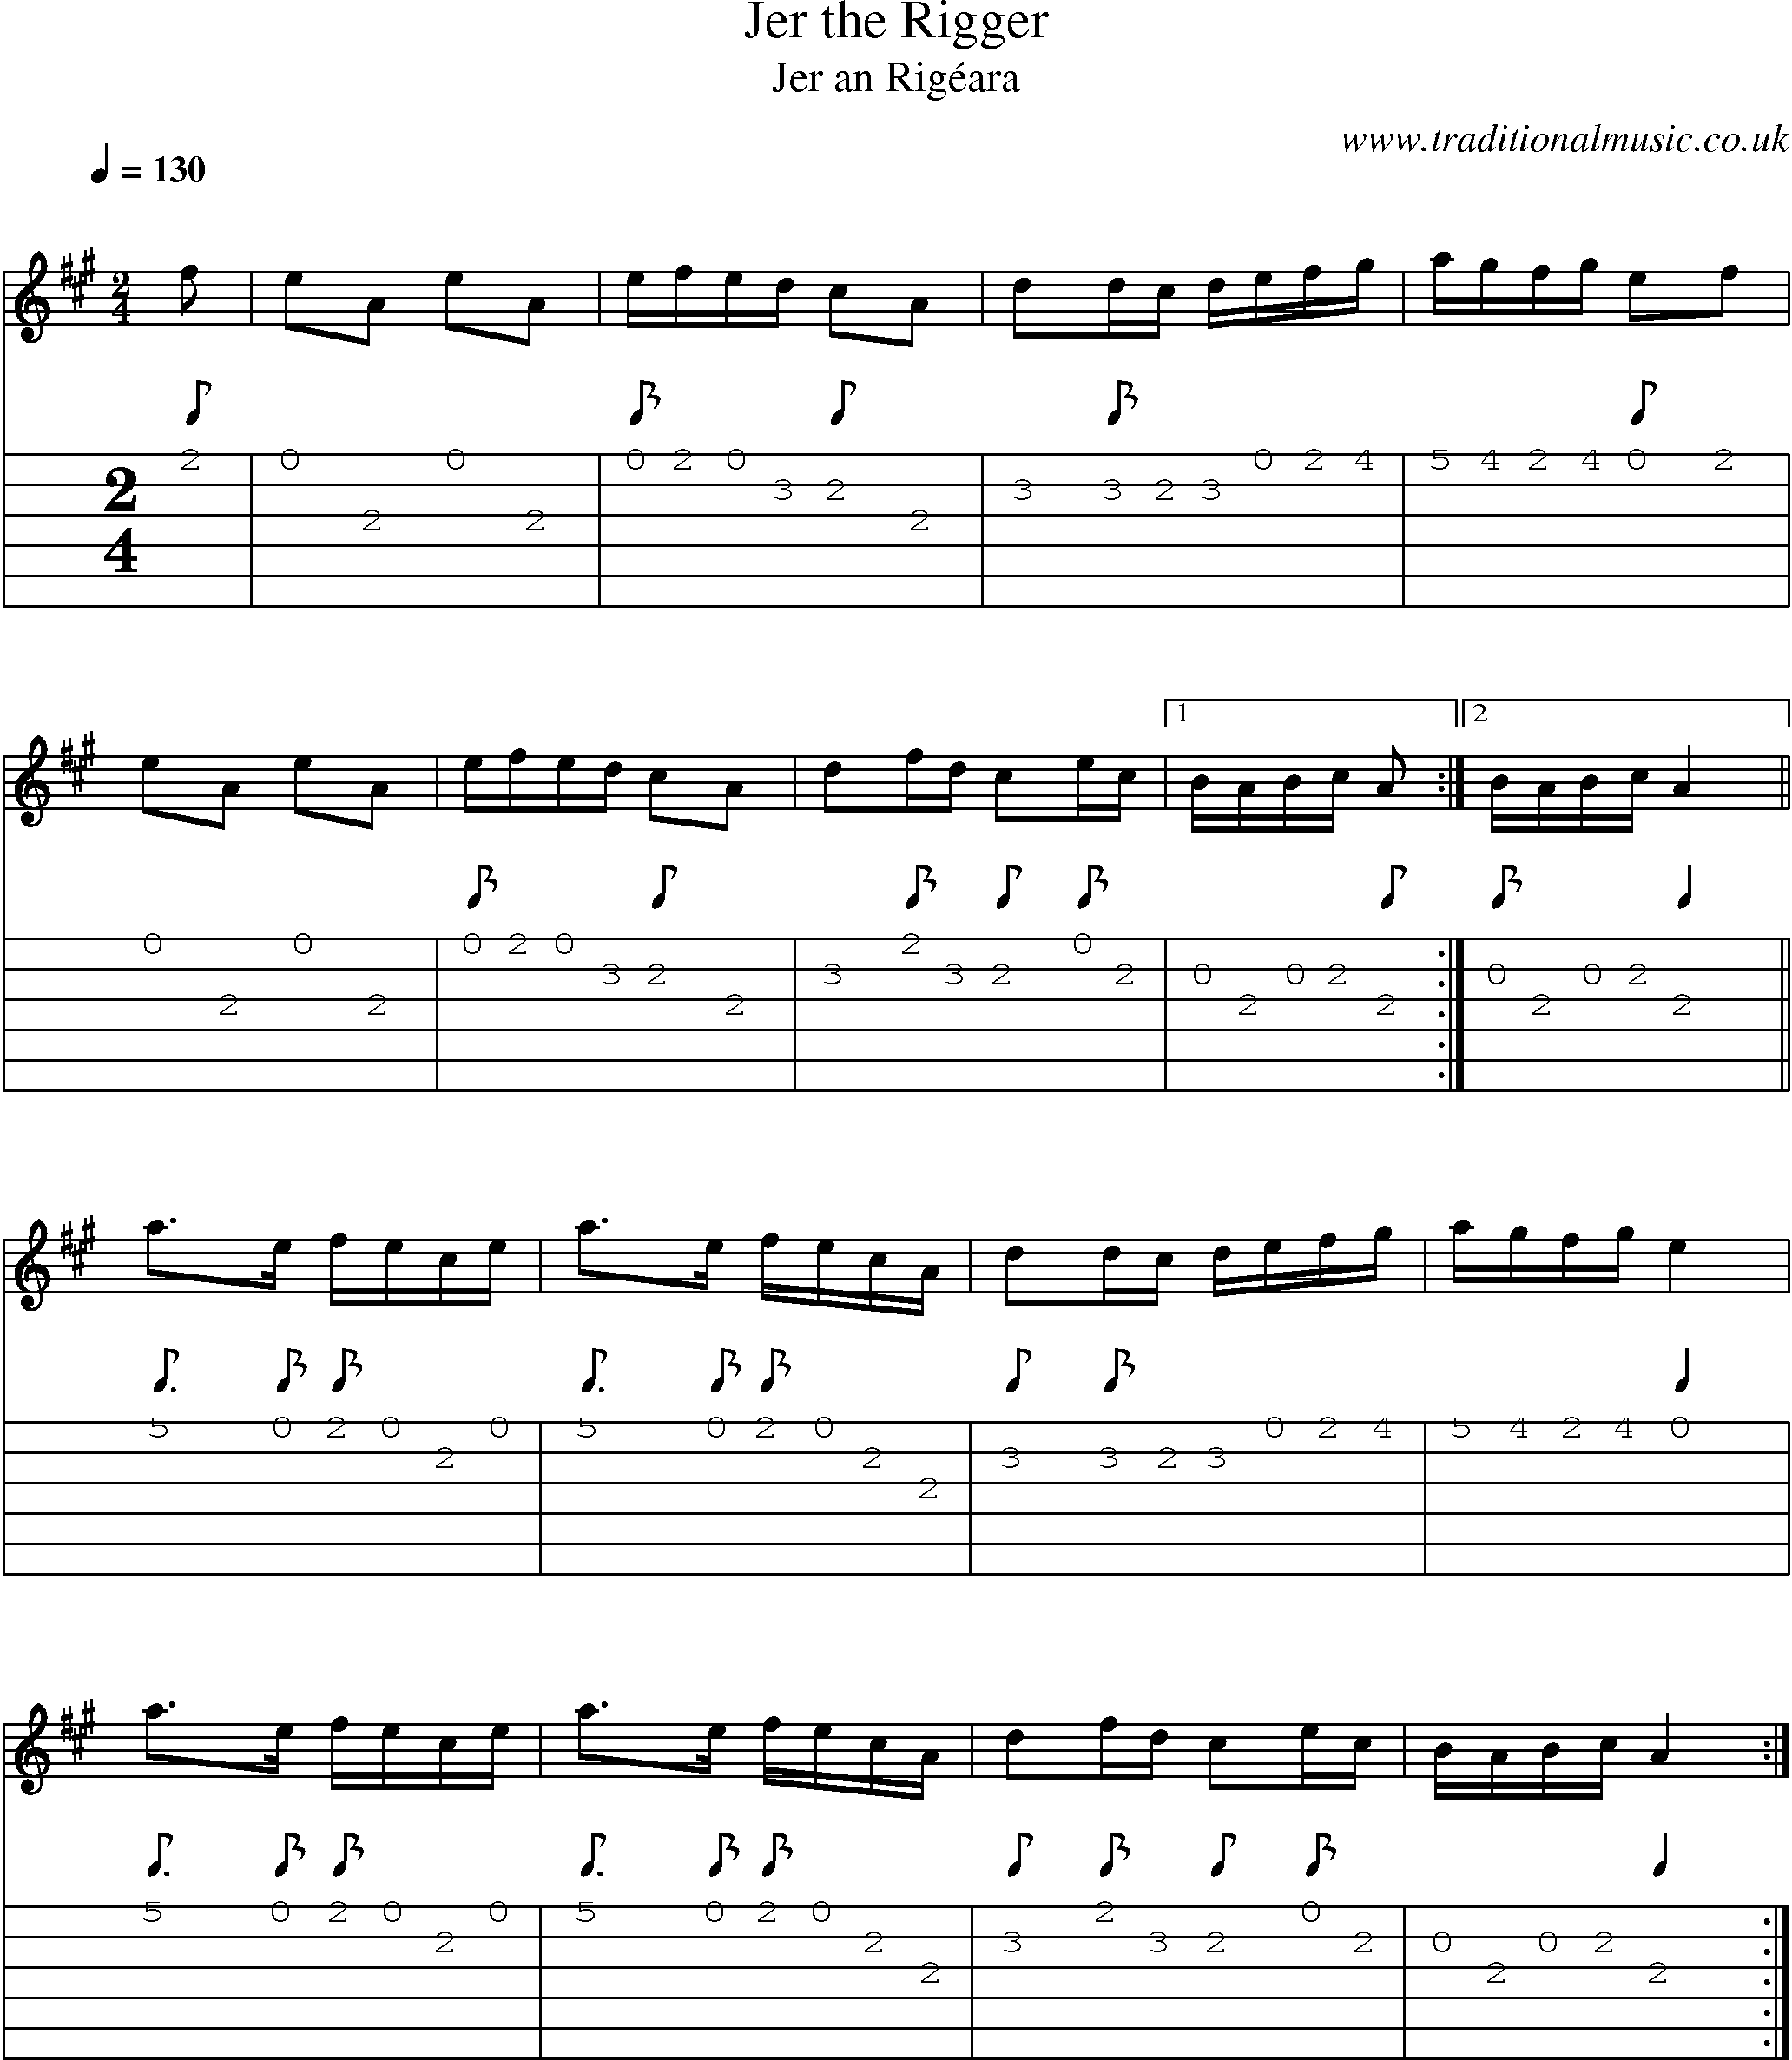 Music Score and Guitar Tabs for Jer Rigger